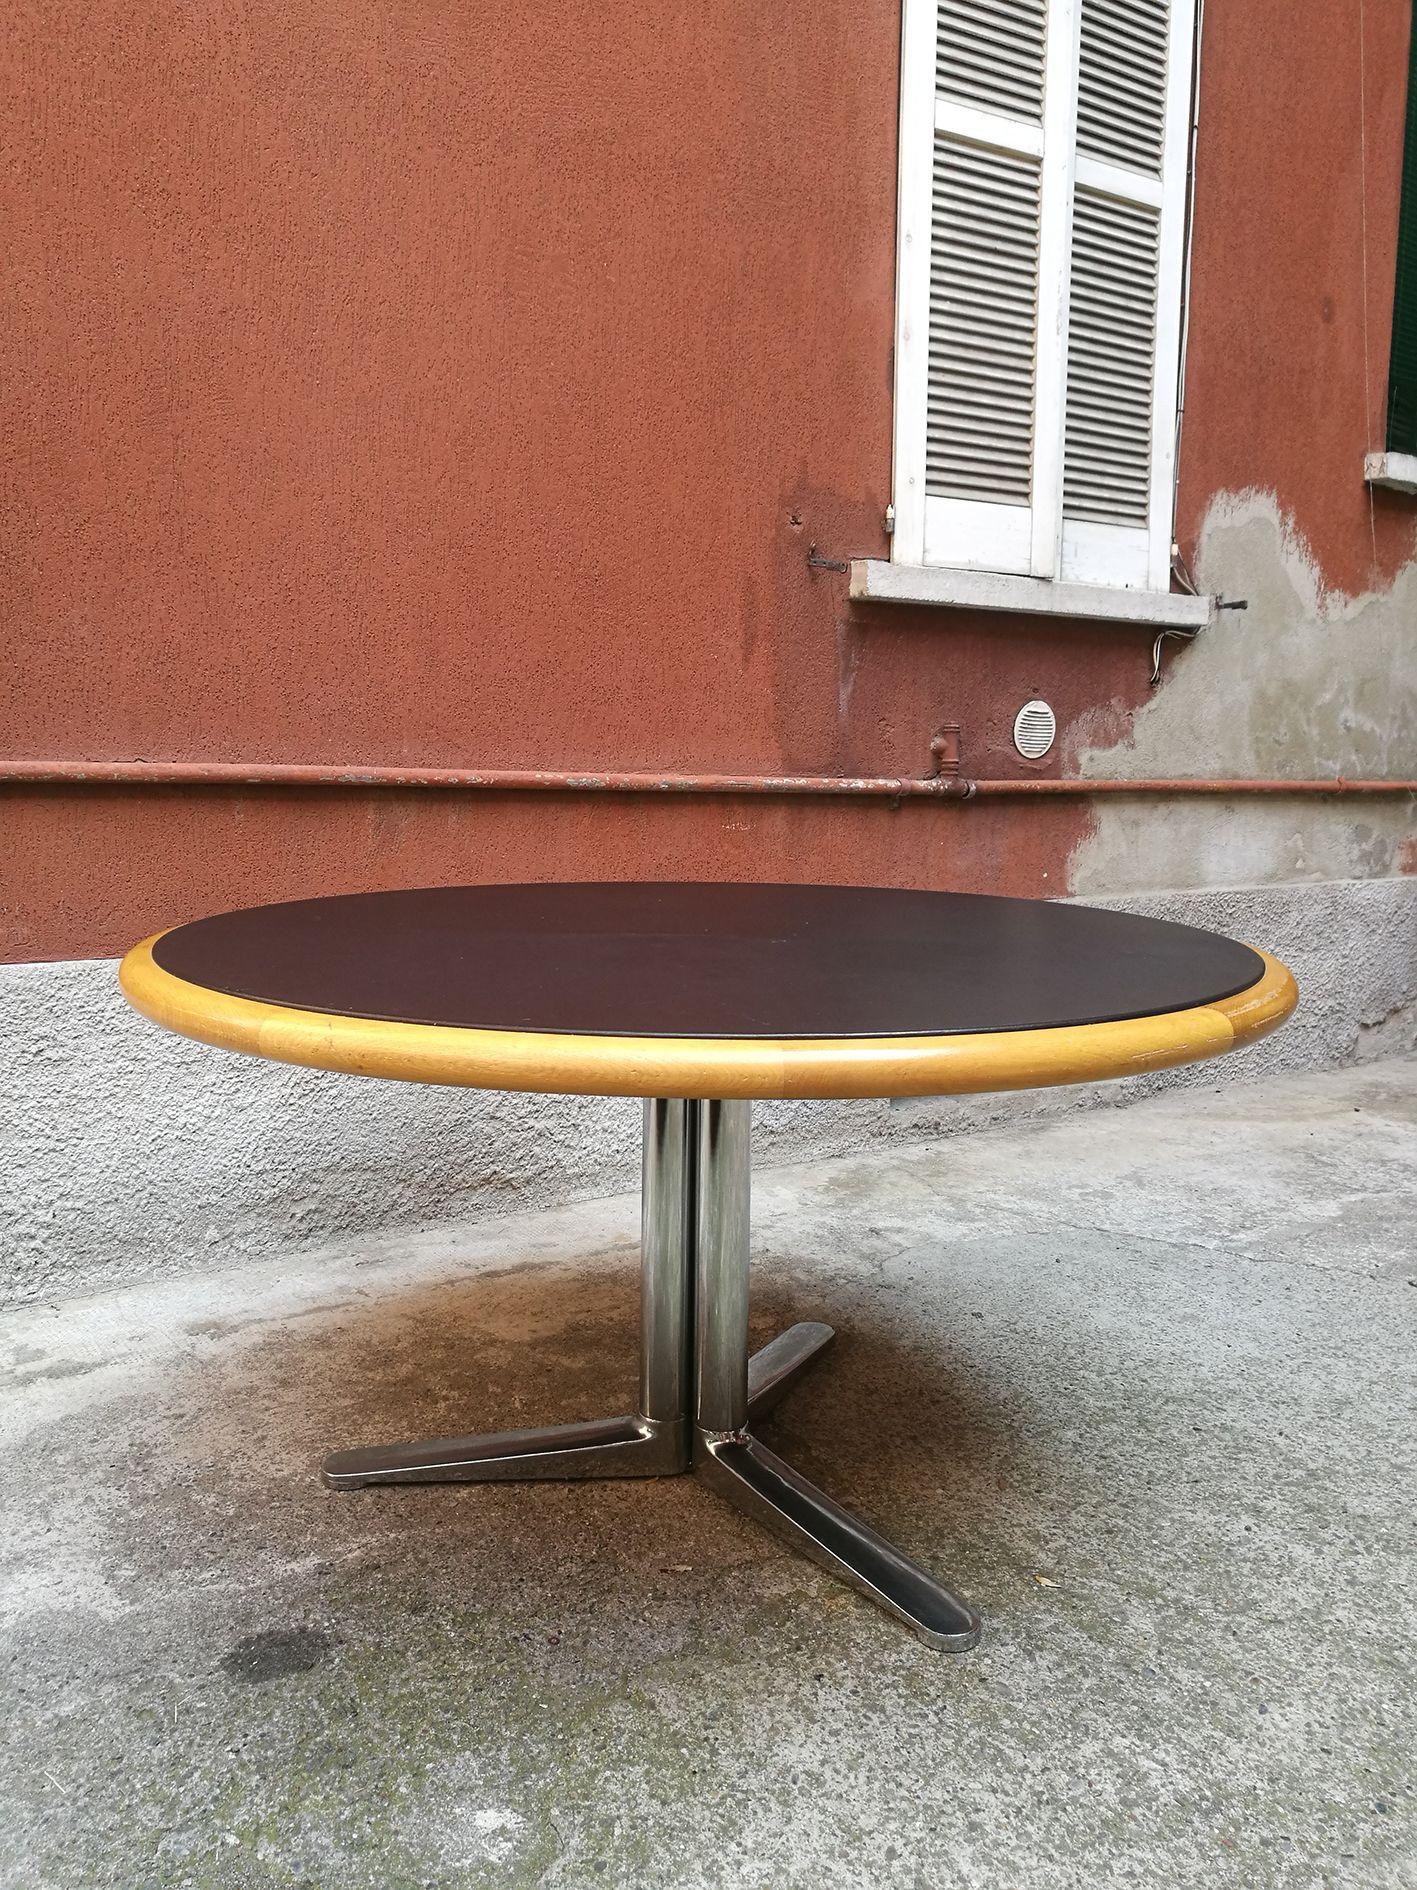 Original Knoll Warren Platner dining Table from 1960
Stunning round, out size dining table from 1960 period by Warren Platner for Knoll
The top is in black leather with solid wood frame and central three-legged chrome metal base.
The big size was